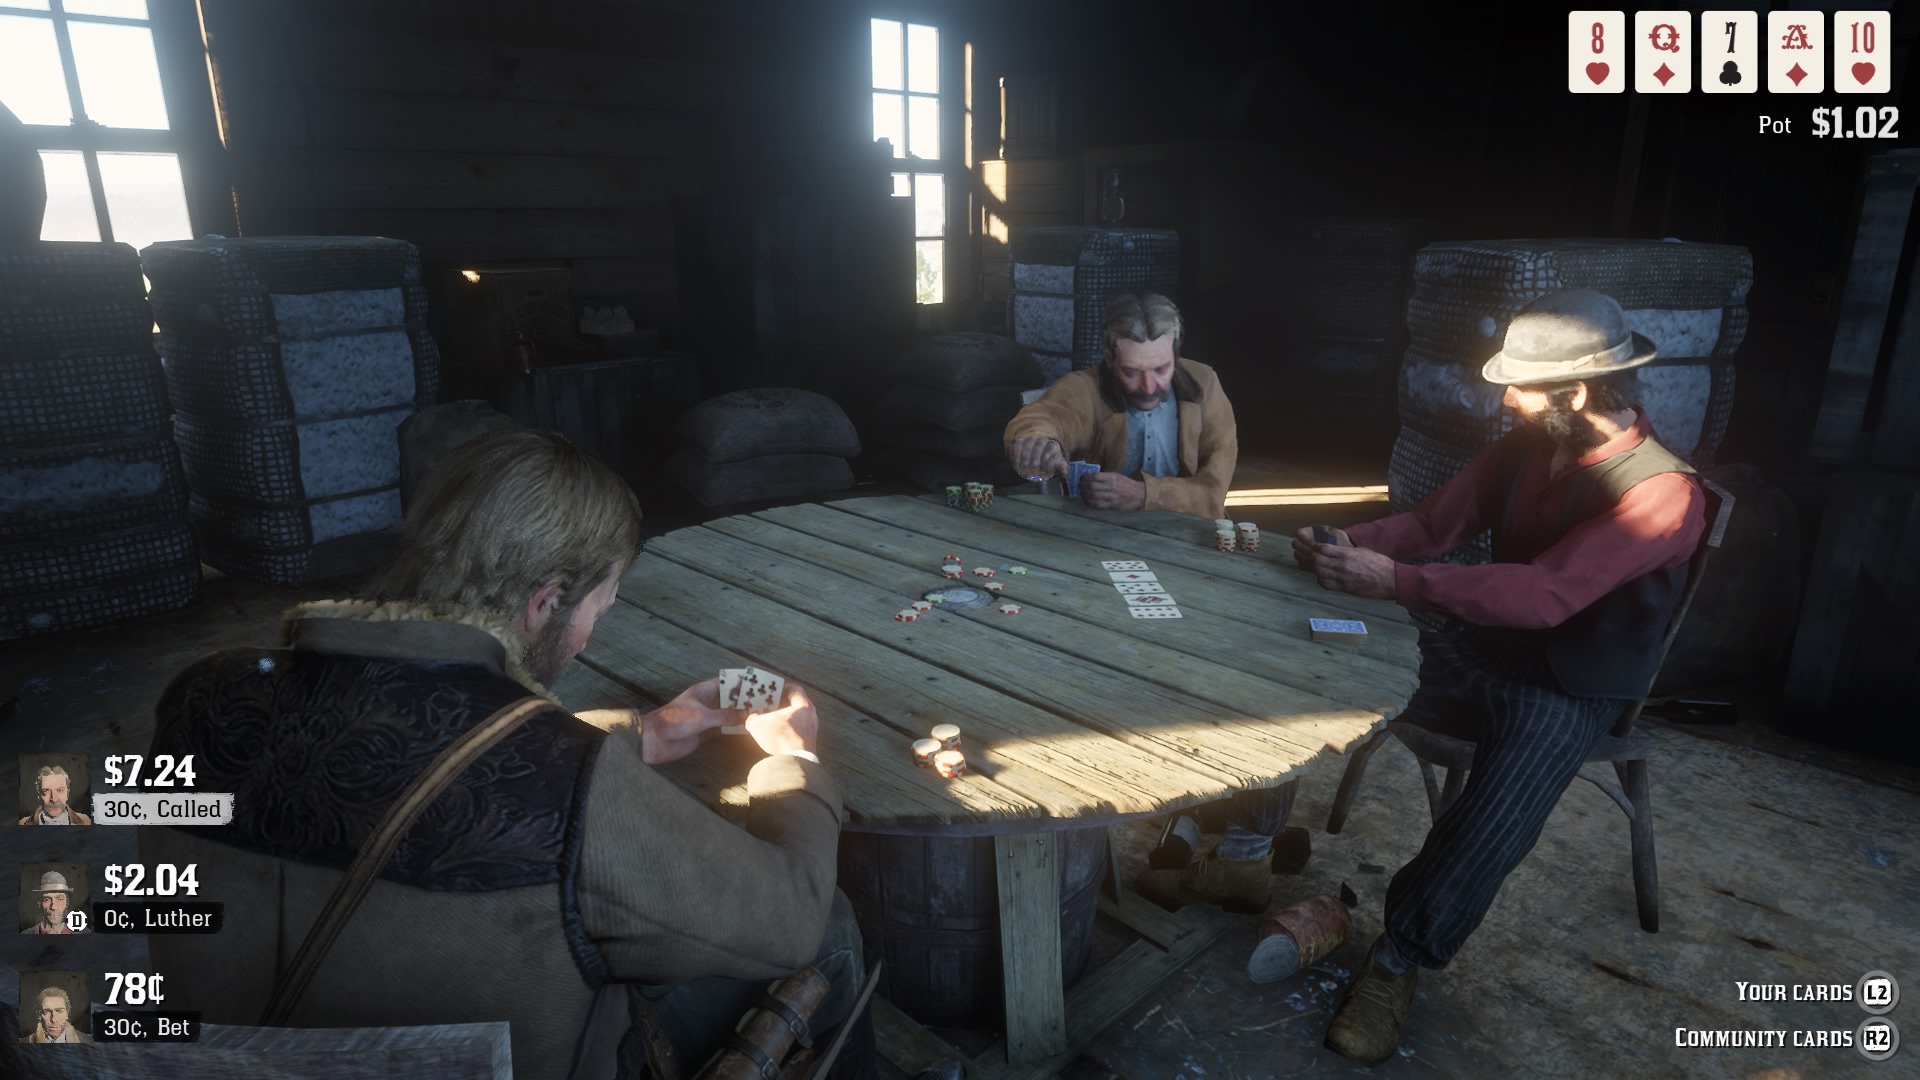 Red Dead Redemption 2: PS4 Pro gameplay footage, This is life in the  outlaw era. Watch first Red Dead Redemption 2 gameplay, captured entirely  from in-game footage on PS4 Pro.